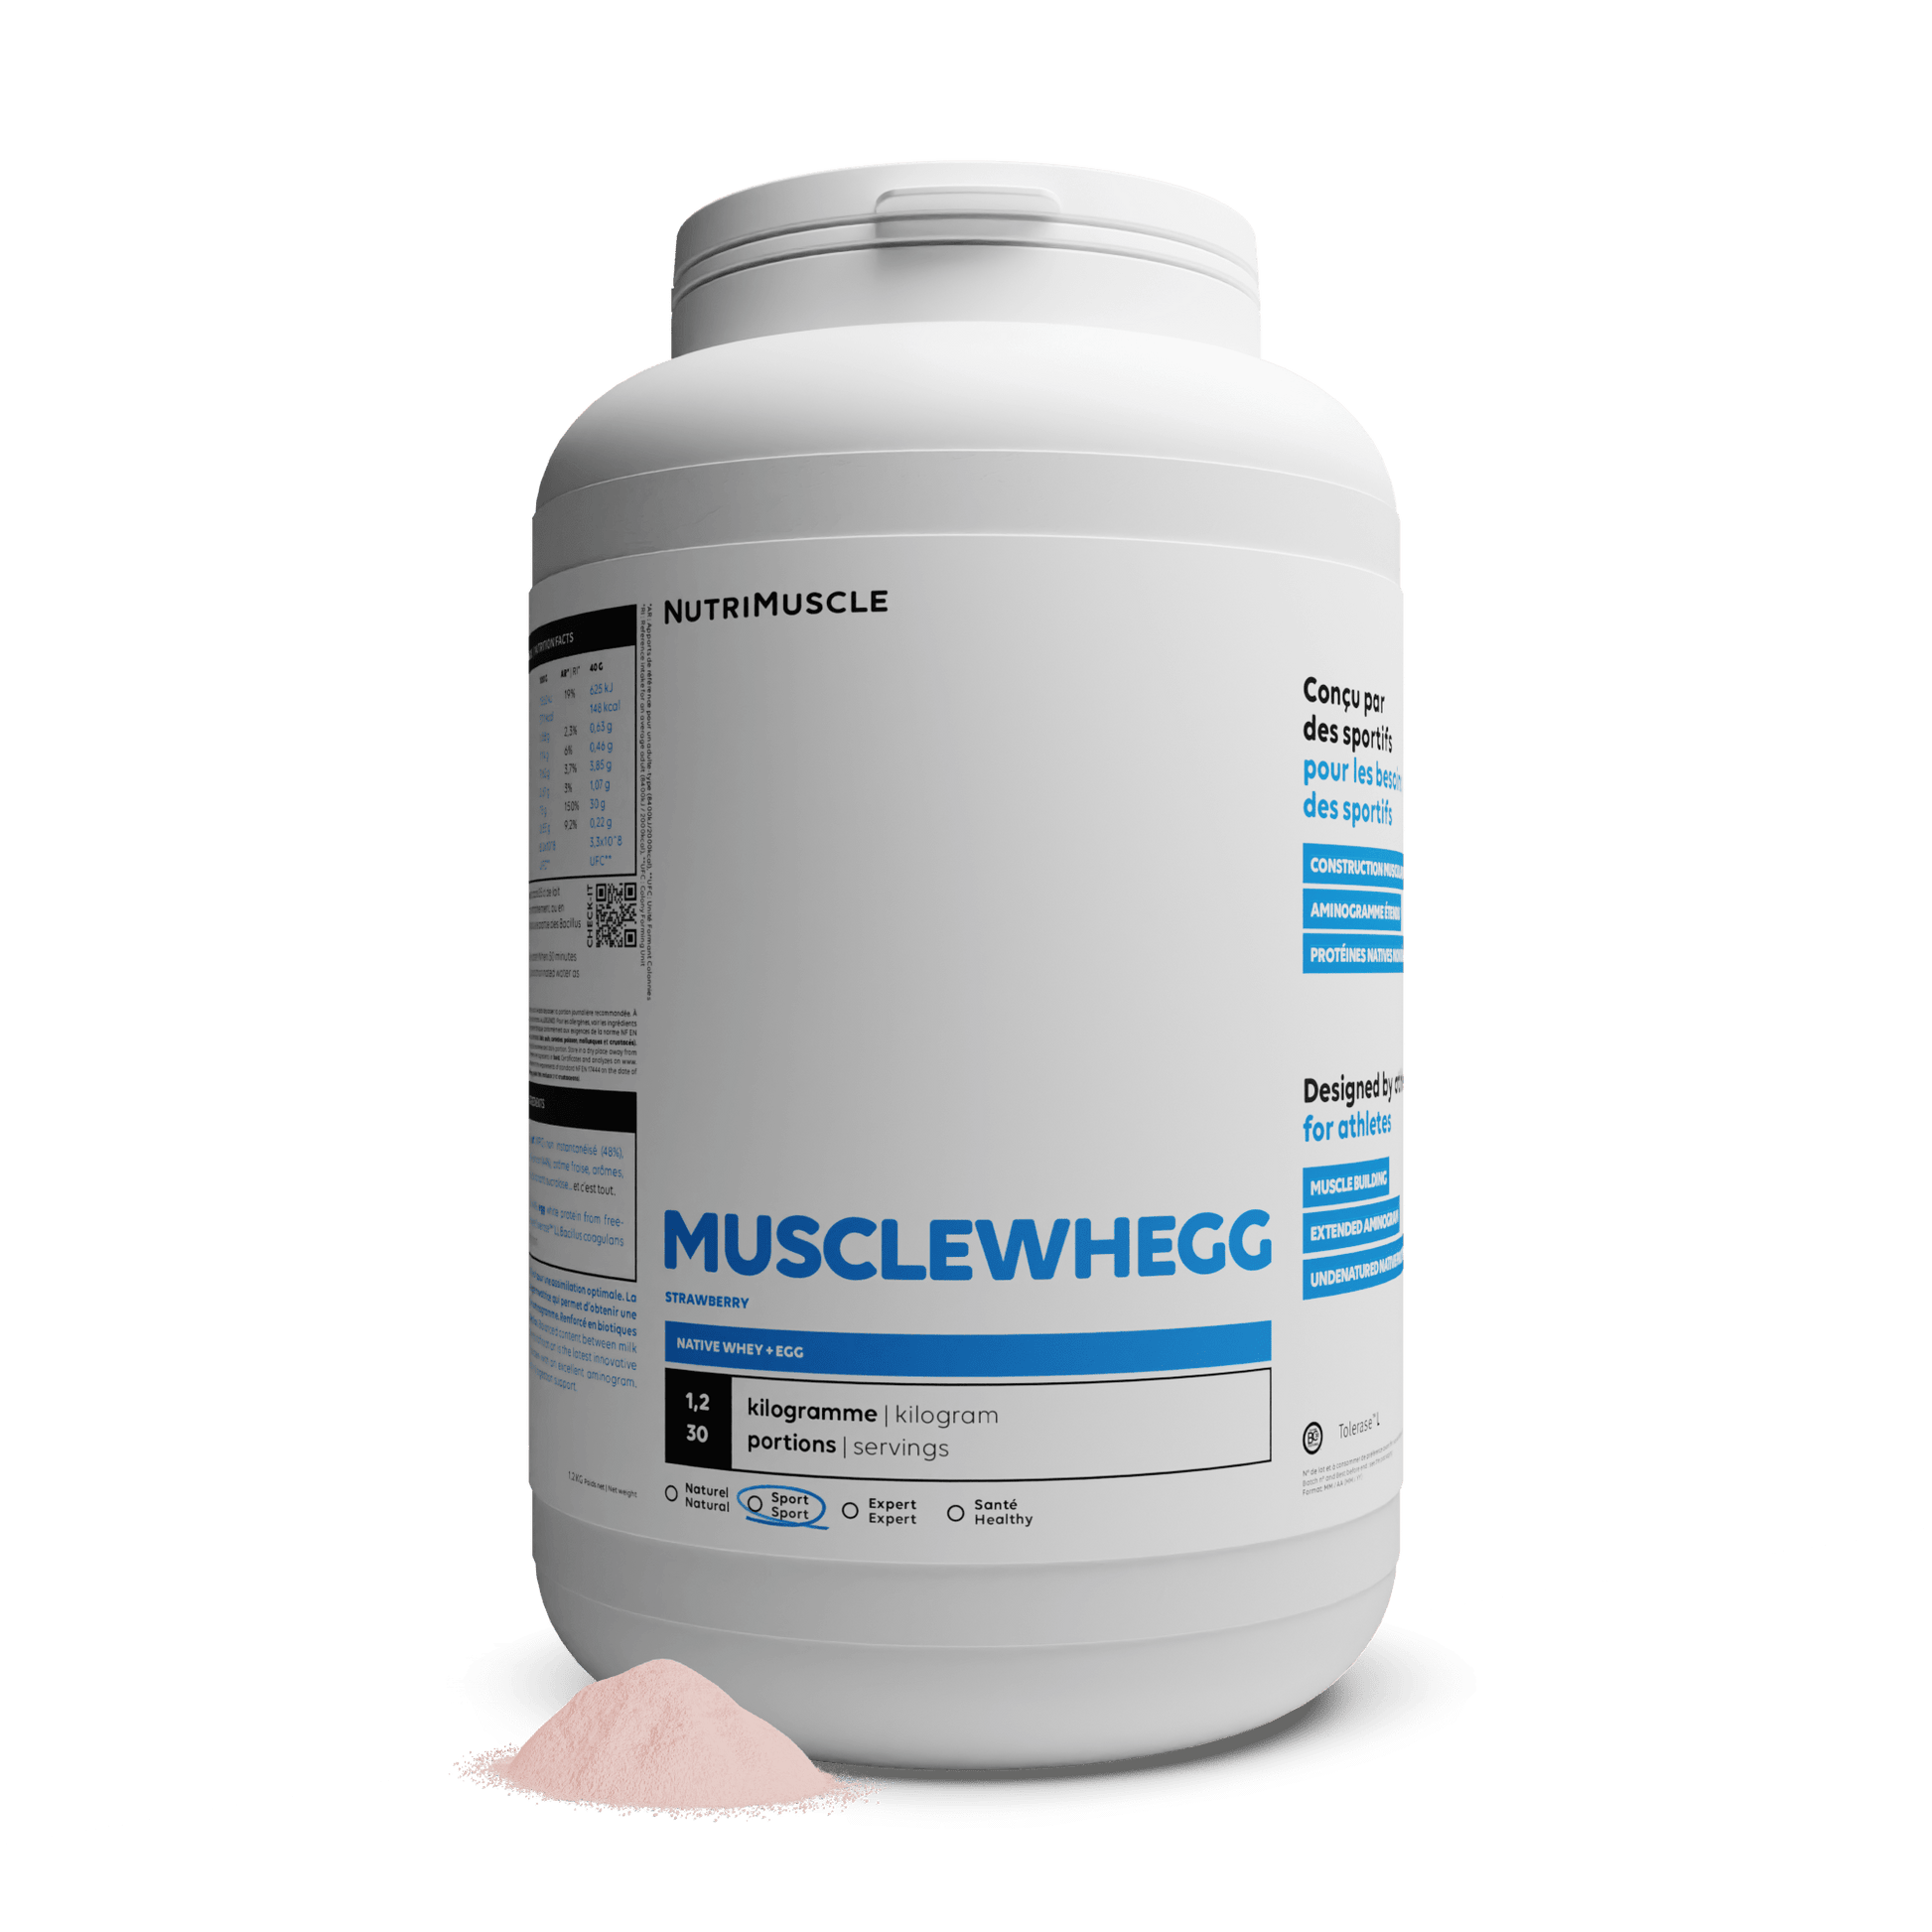 Nutrimuscle Protéines Fraise / 1.20 kg Musclewhegg - Mix Protein